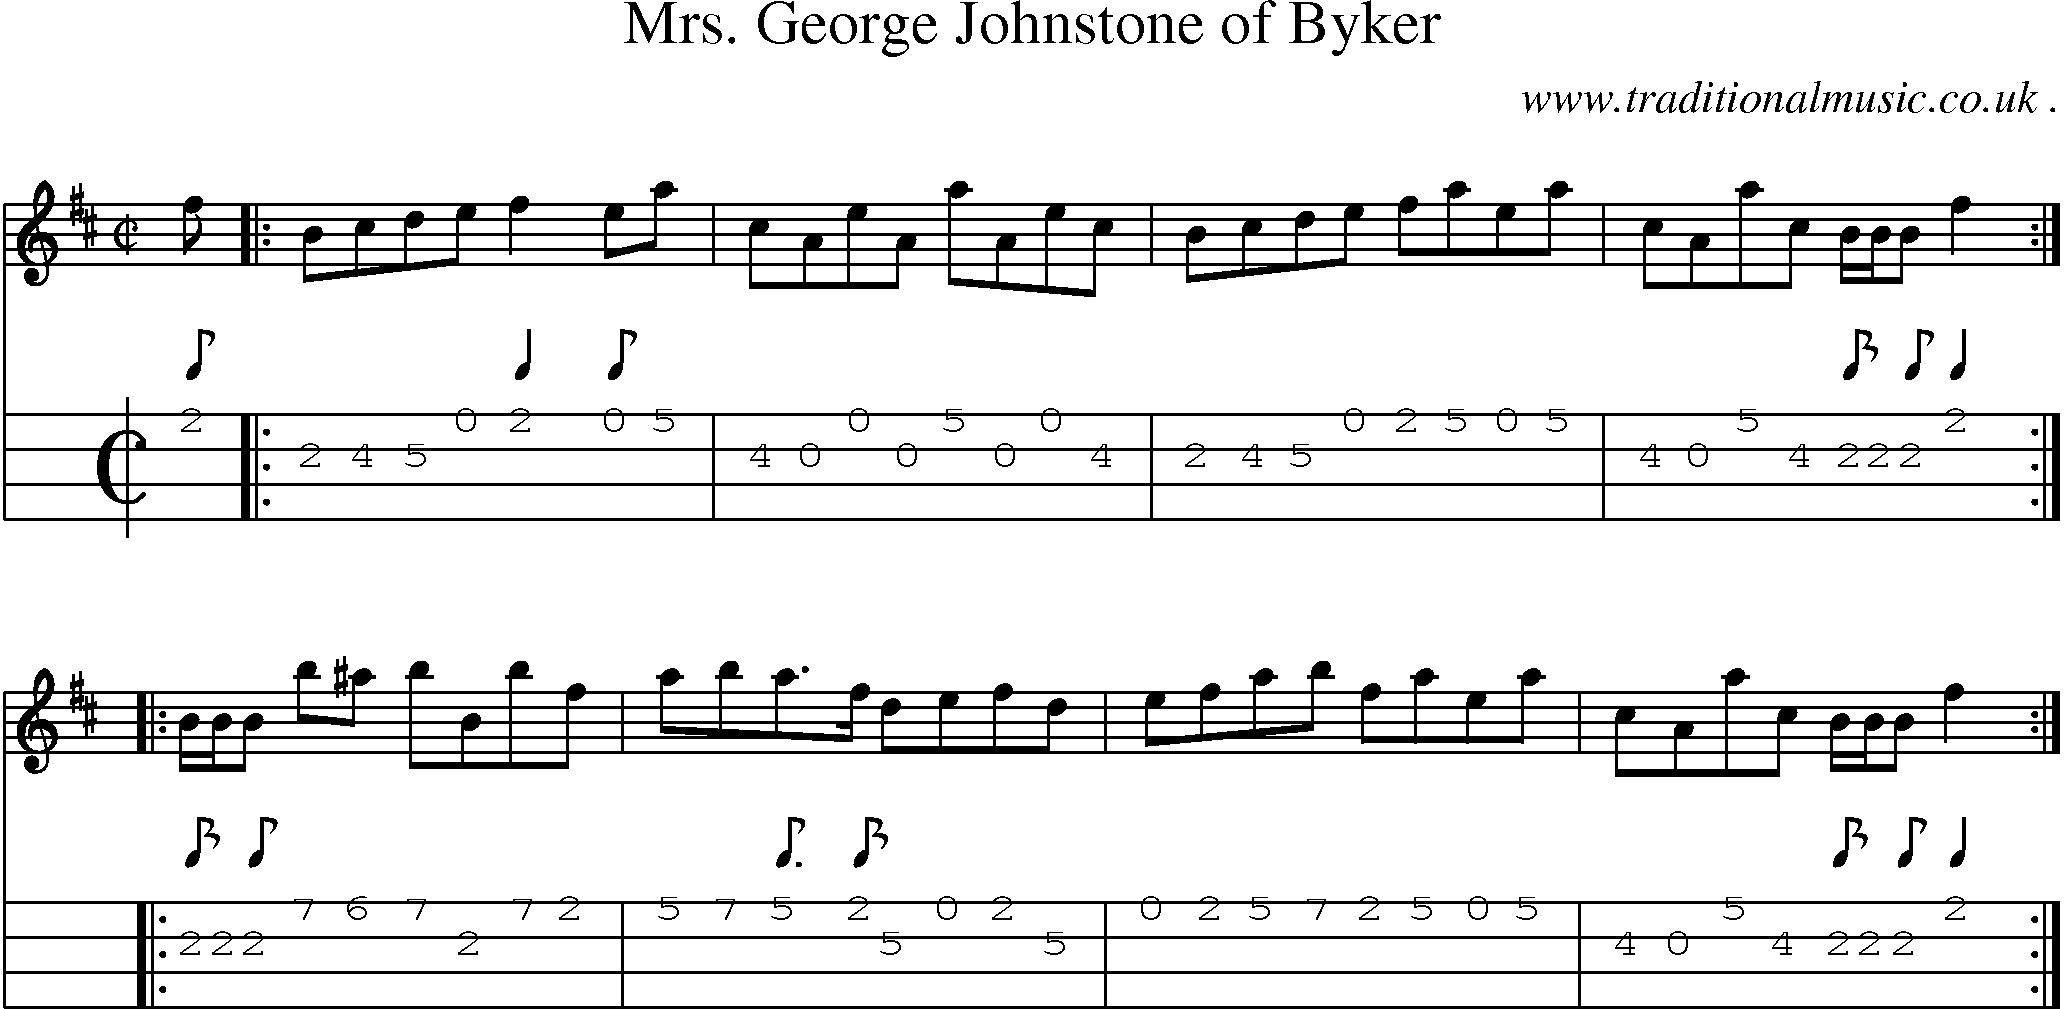 Sheet-music  score, Chords and Mandolin Tabs for Mrs George Johnstone Of Byker